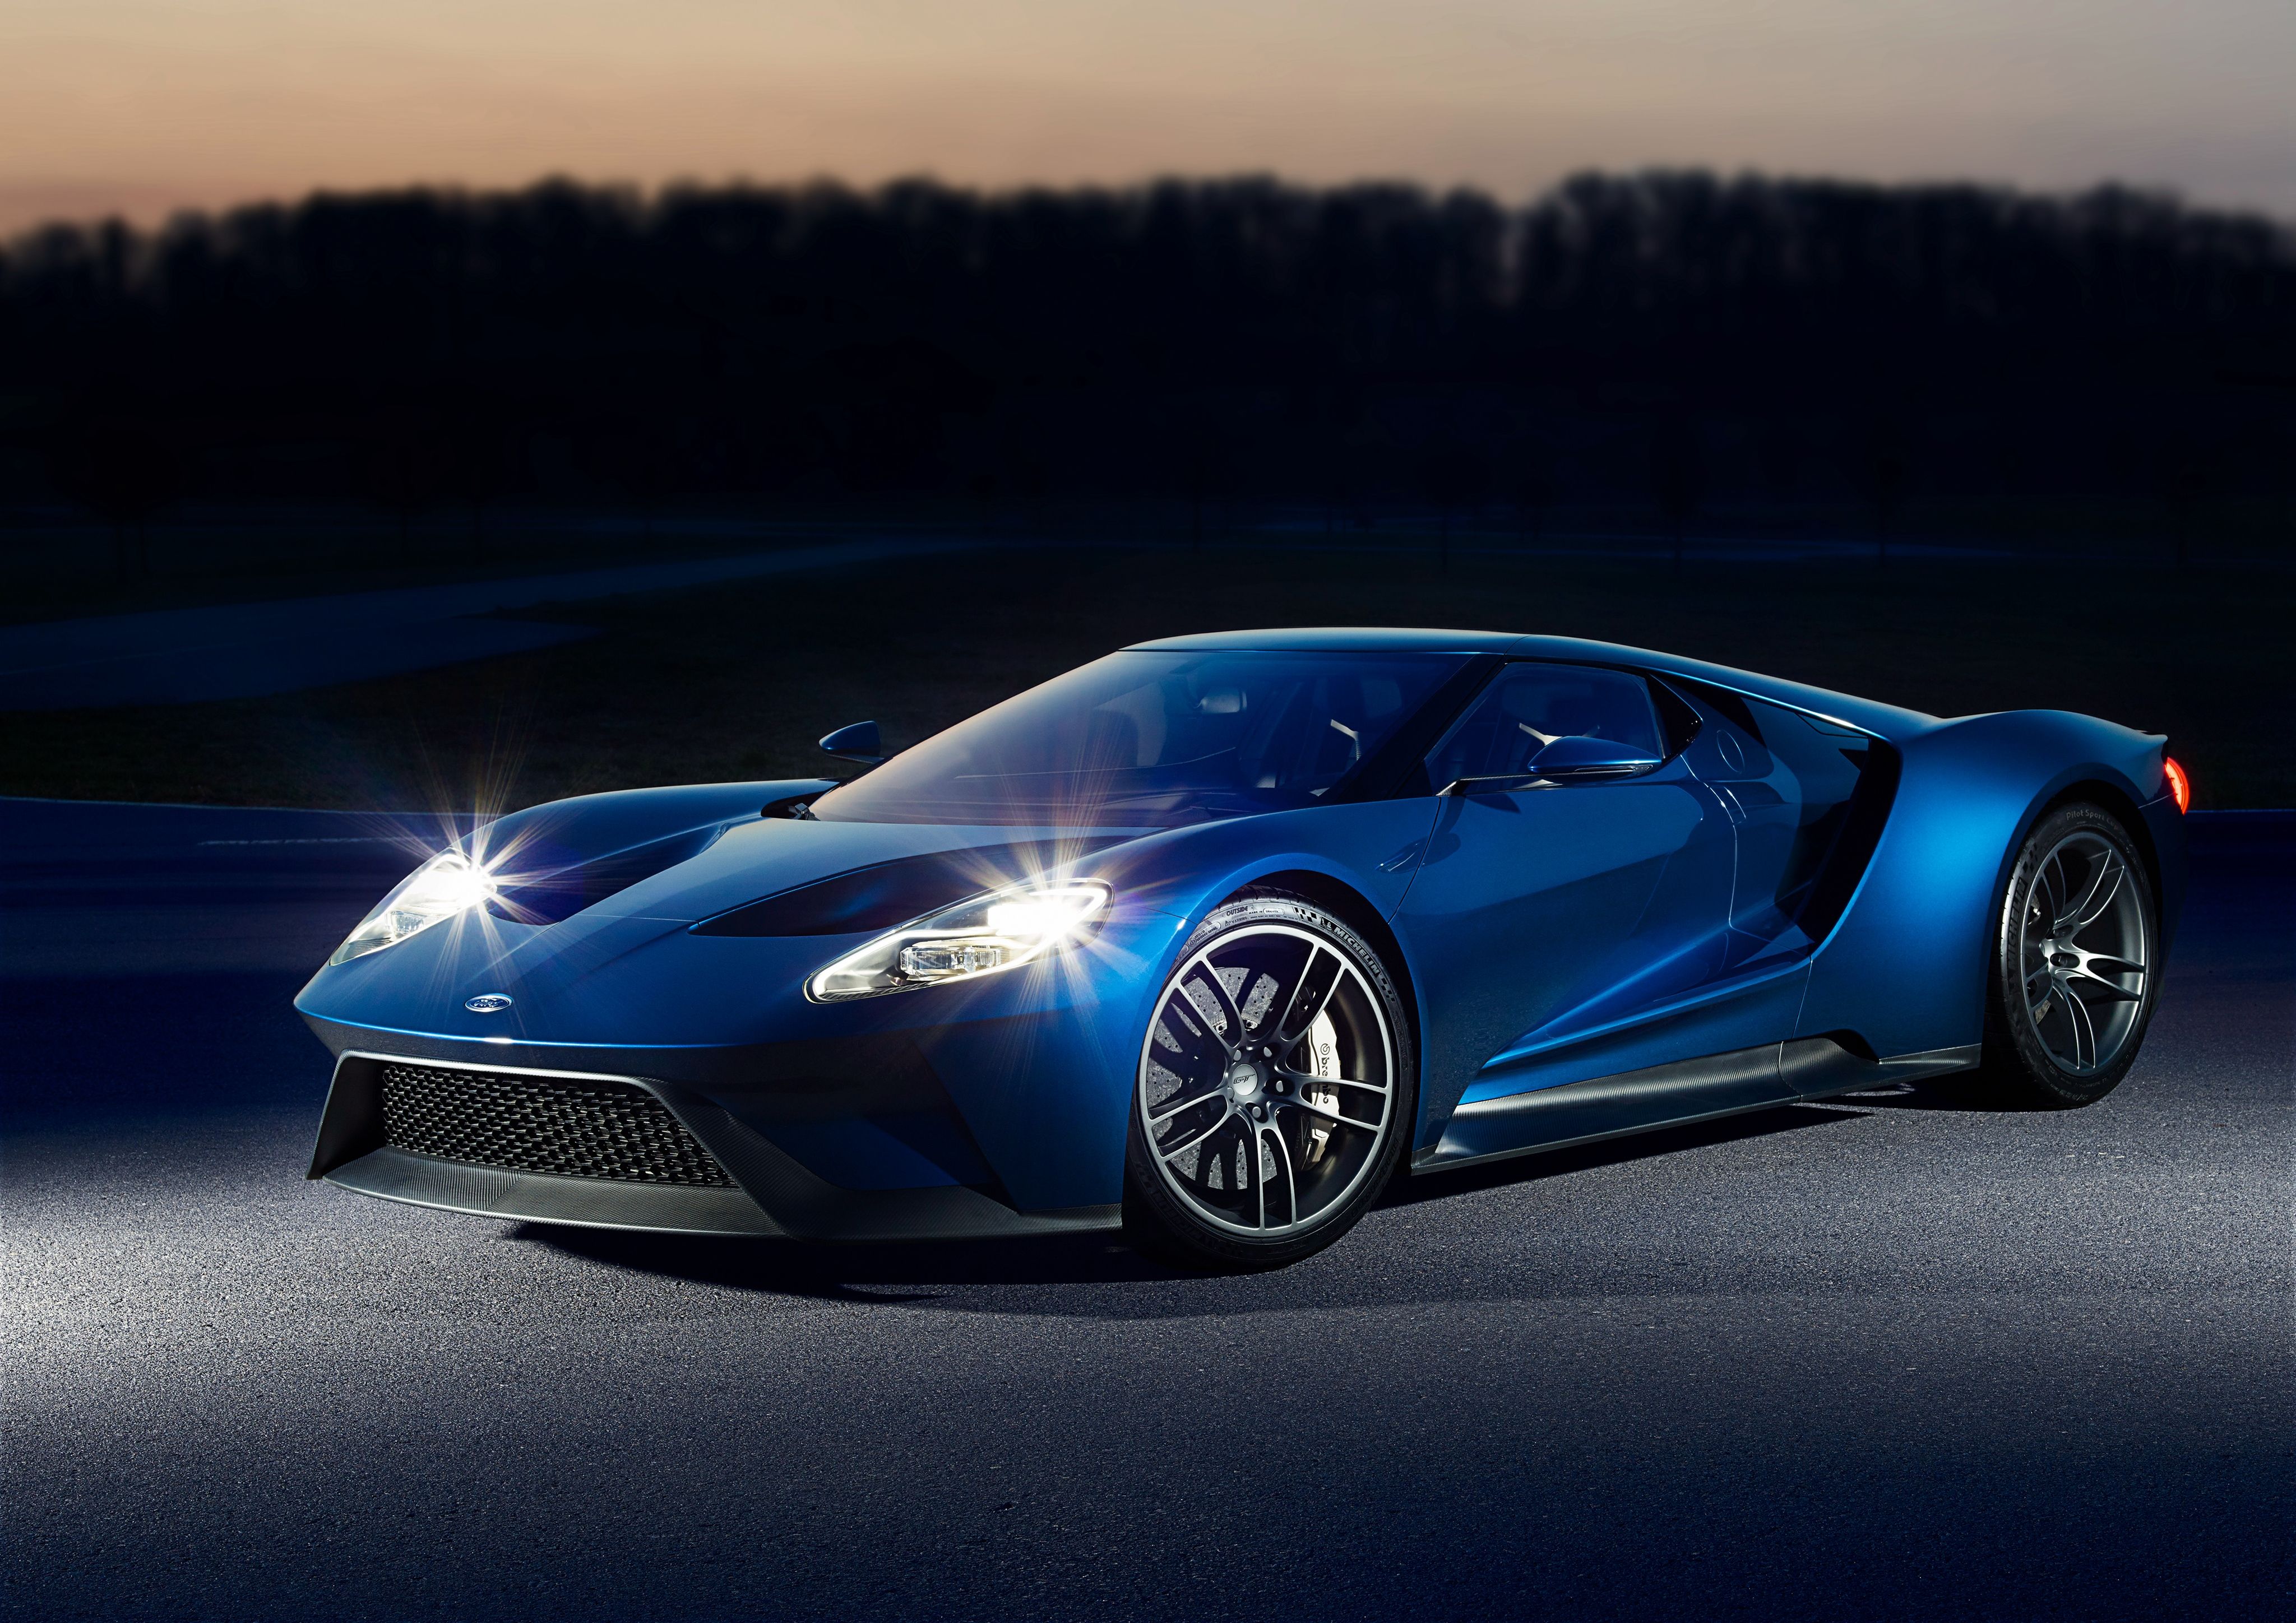 Ford GT 2016 HD wallpaper free download